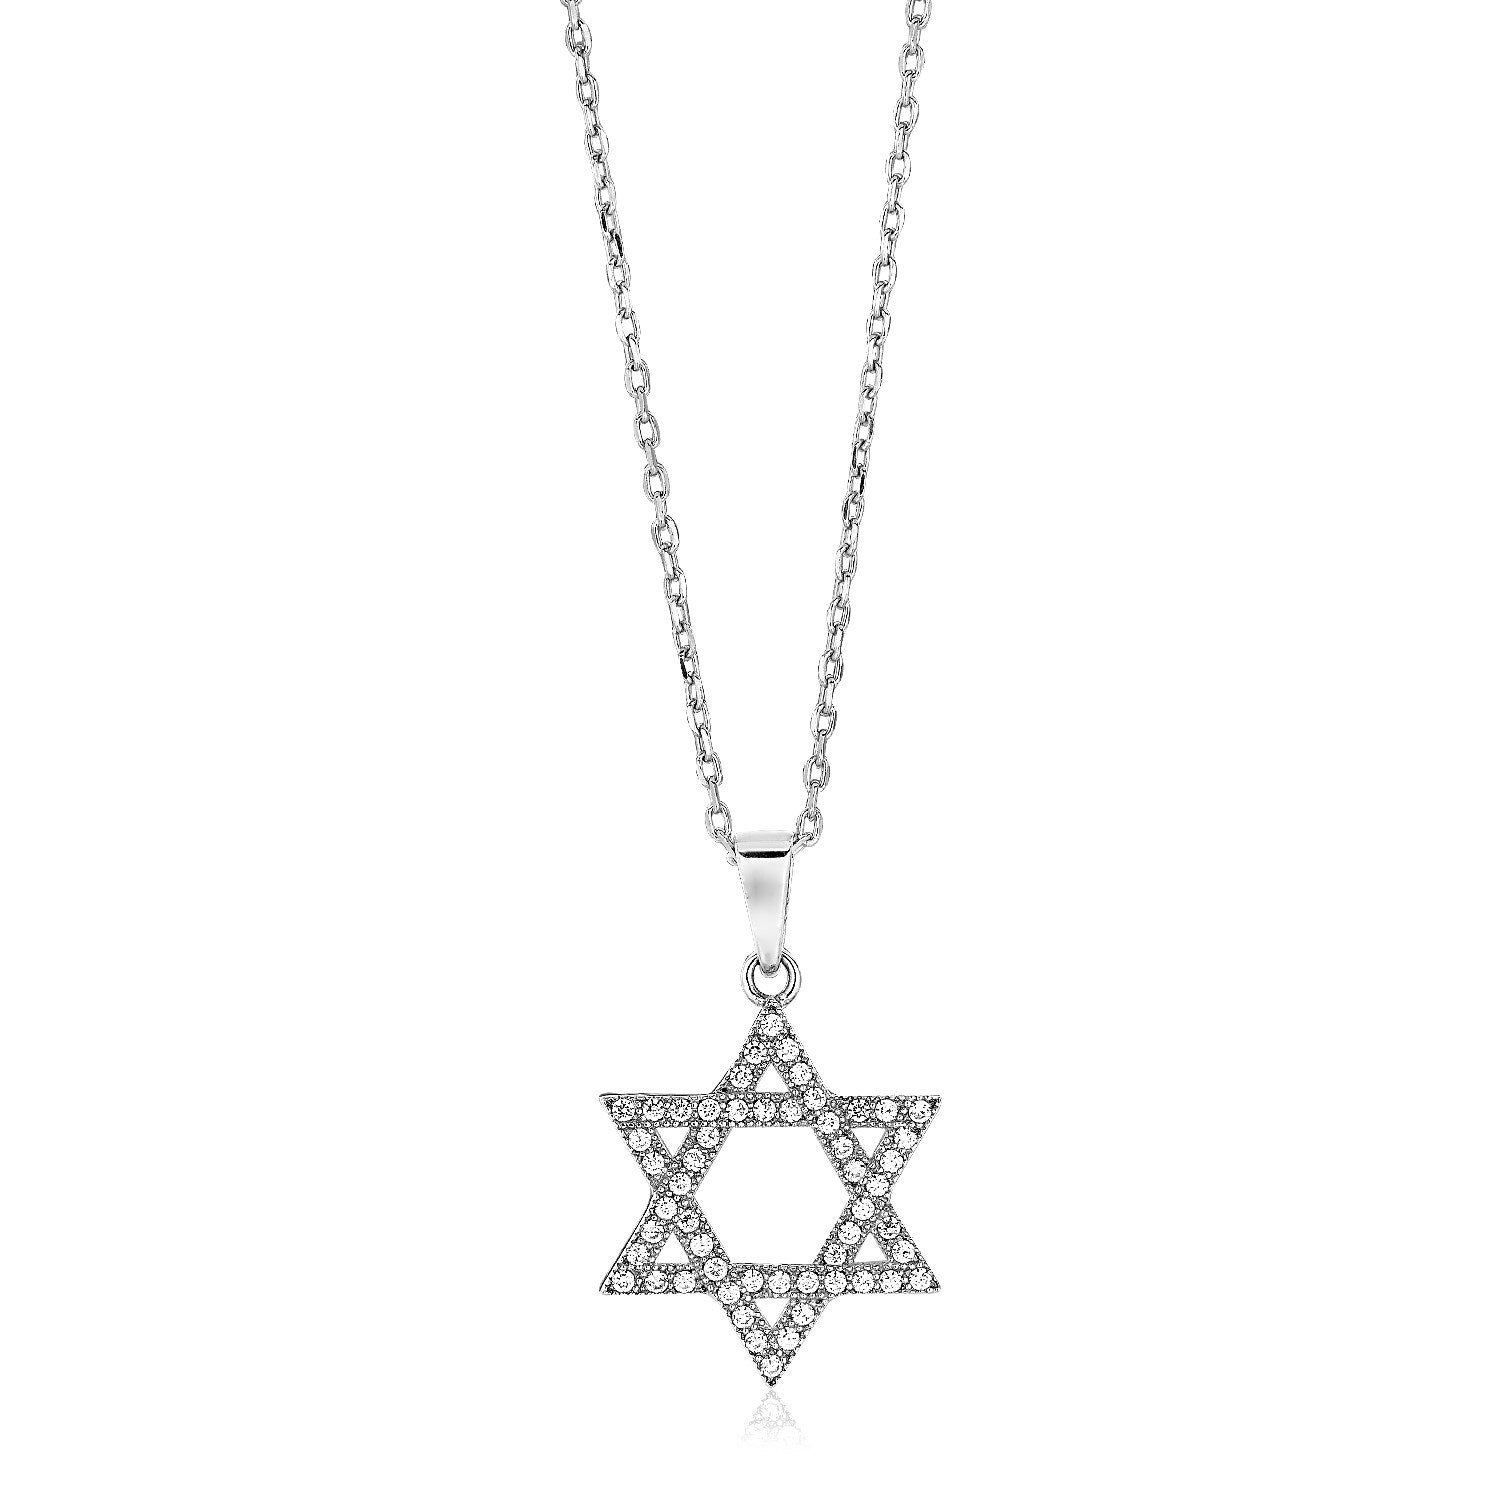 Sterling Silver Star of David Necklace with Cubic Zirconias, size 18''